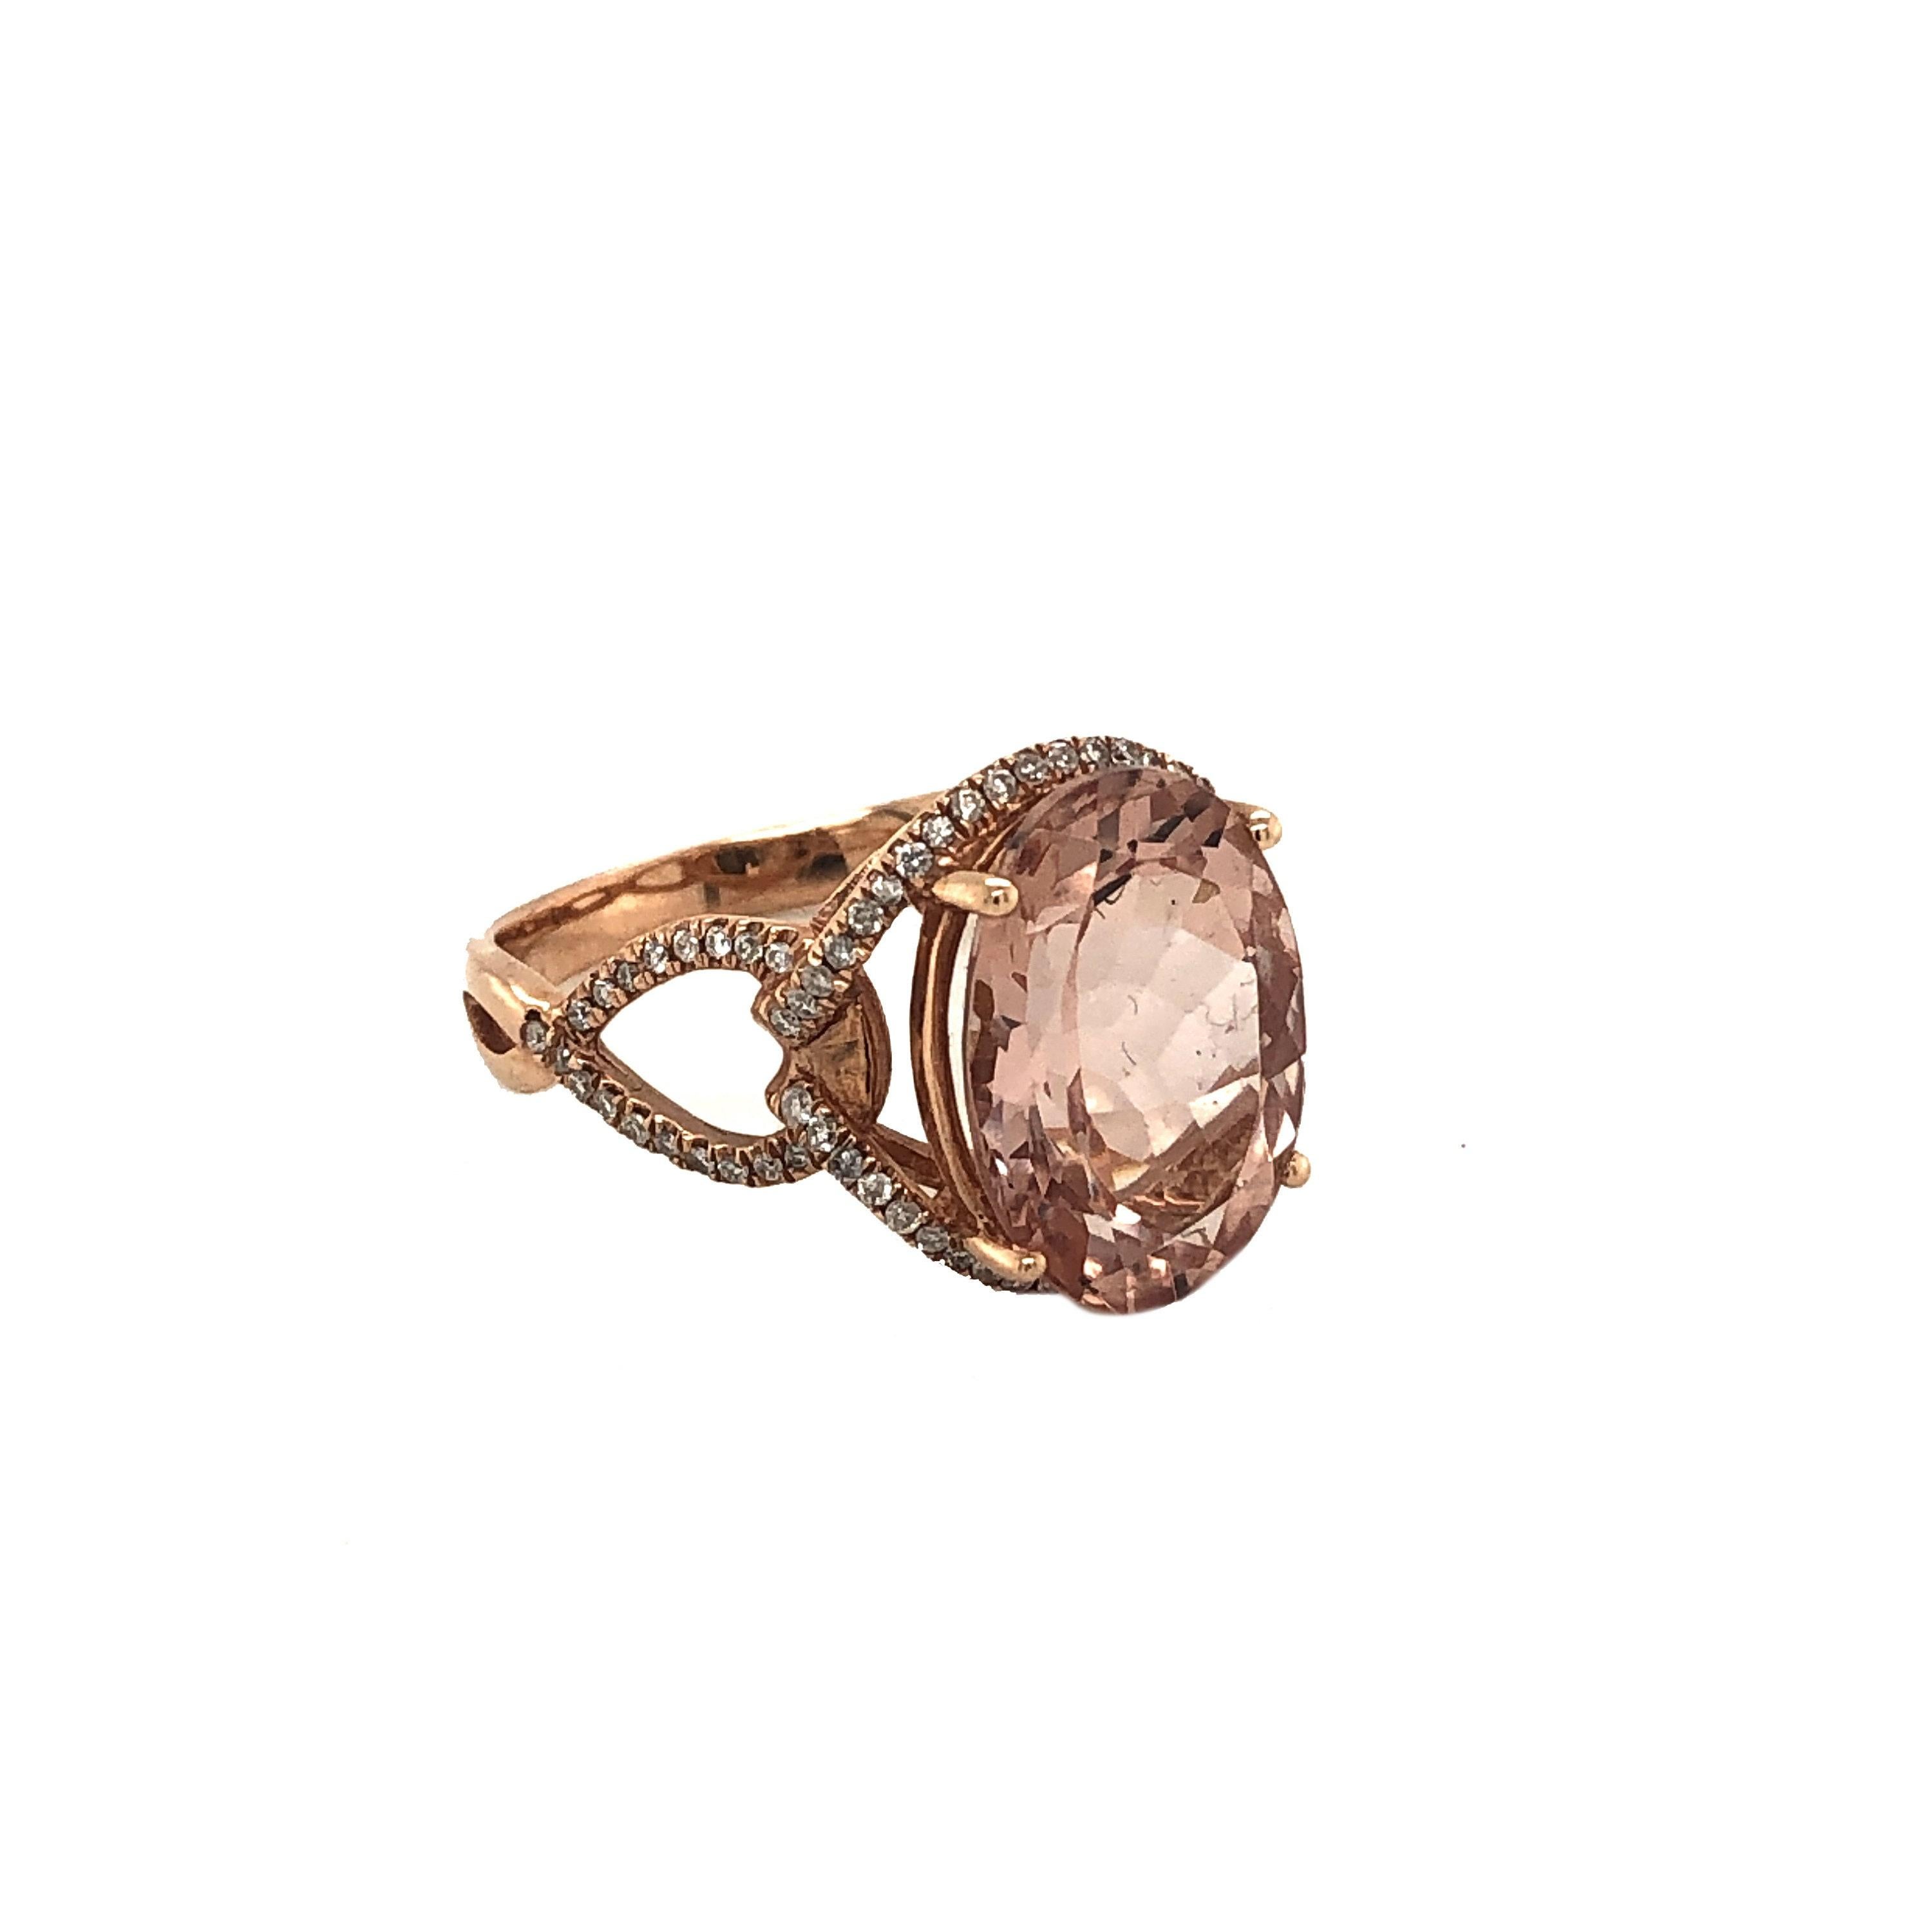 This featured item is a gorgeous natural 5.19CT morganite and diamond halo ring set in solid 14K rose gold. The natural 14x10MM Oval cut 5.19 carat morganite stone has a vibrant pinky peach color and is accented by a halo of round-cut white